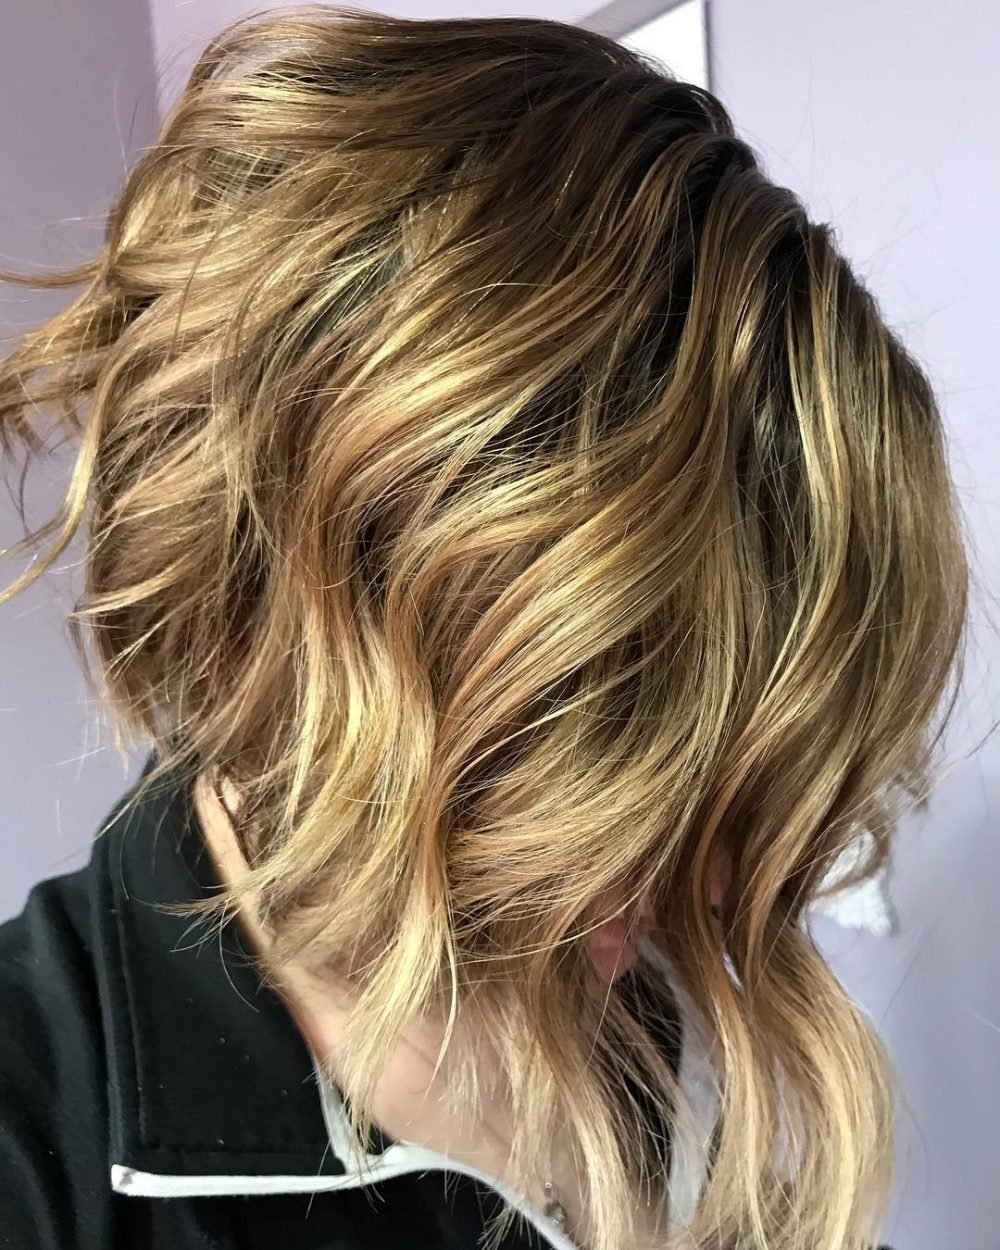 Short Black Hair with Blonde Highlights